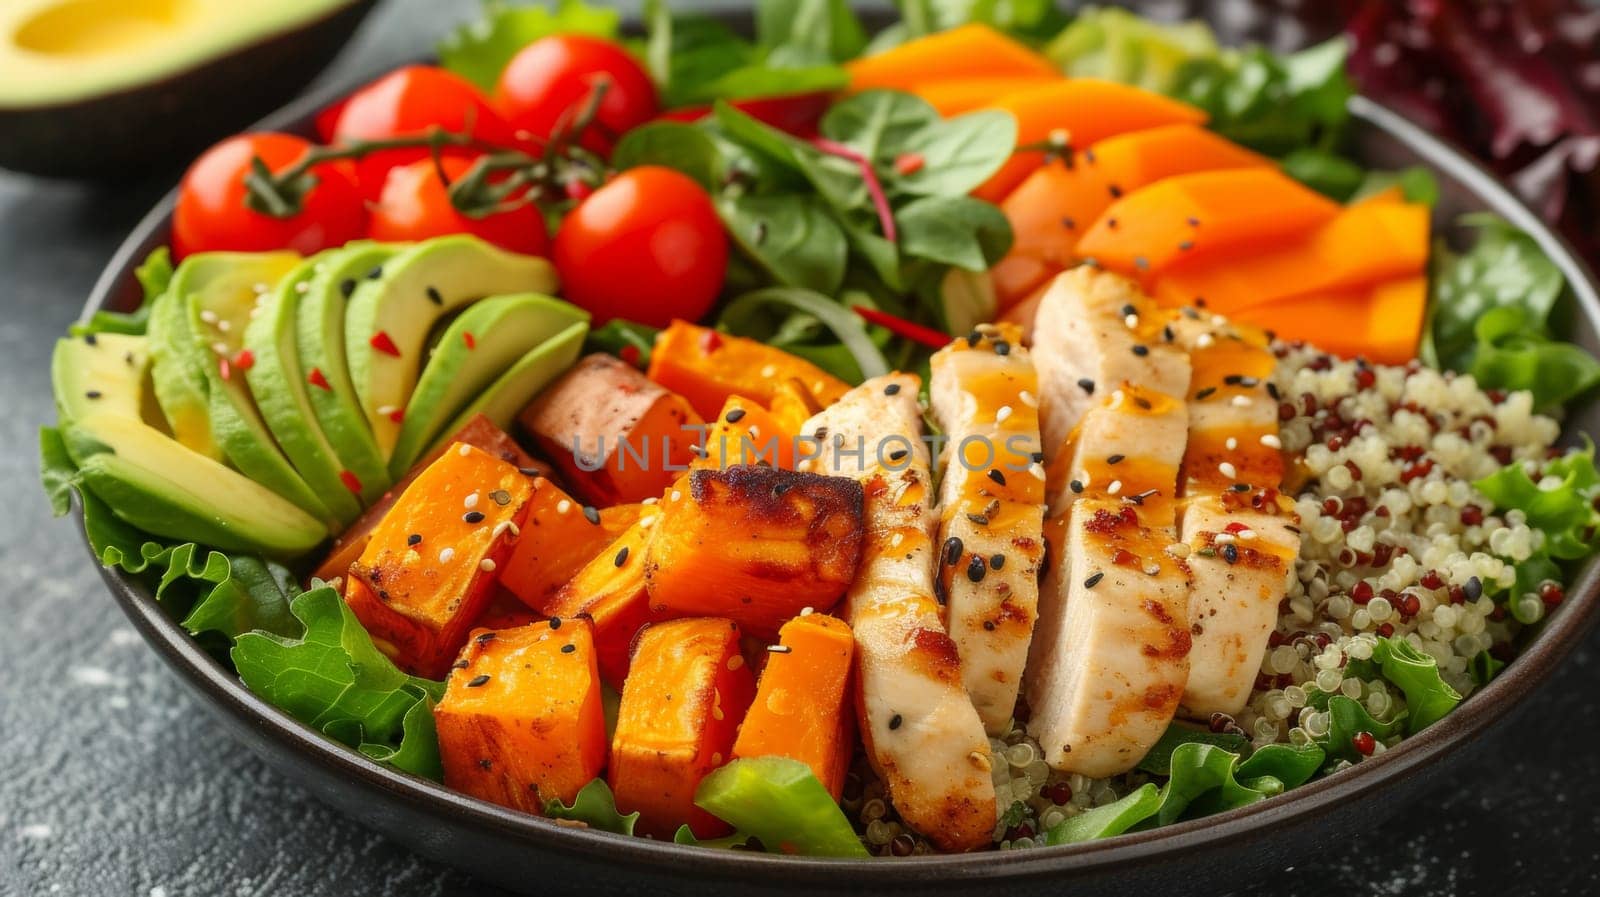 A bowl of a salad with chicken, avocado and tomatoes